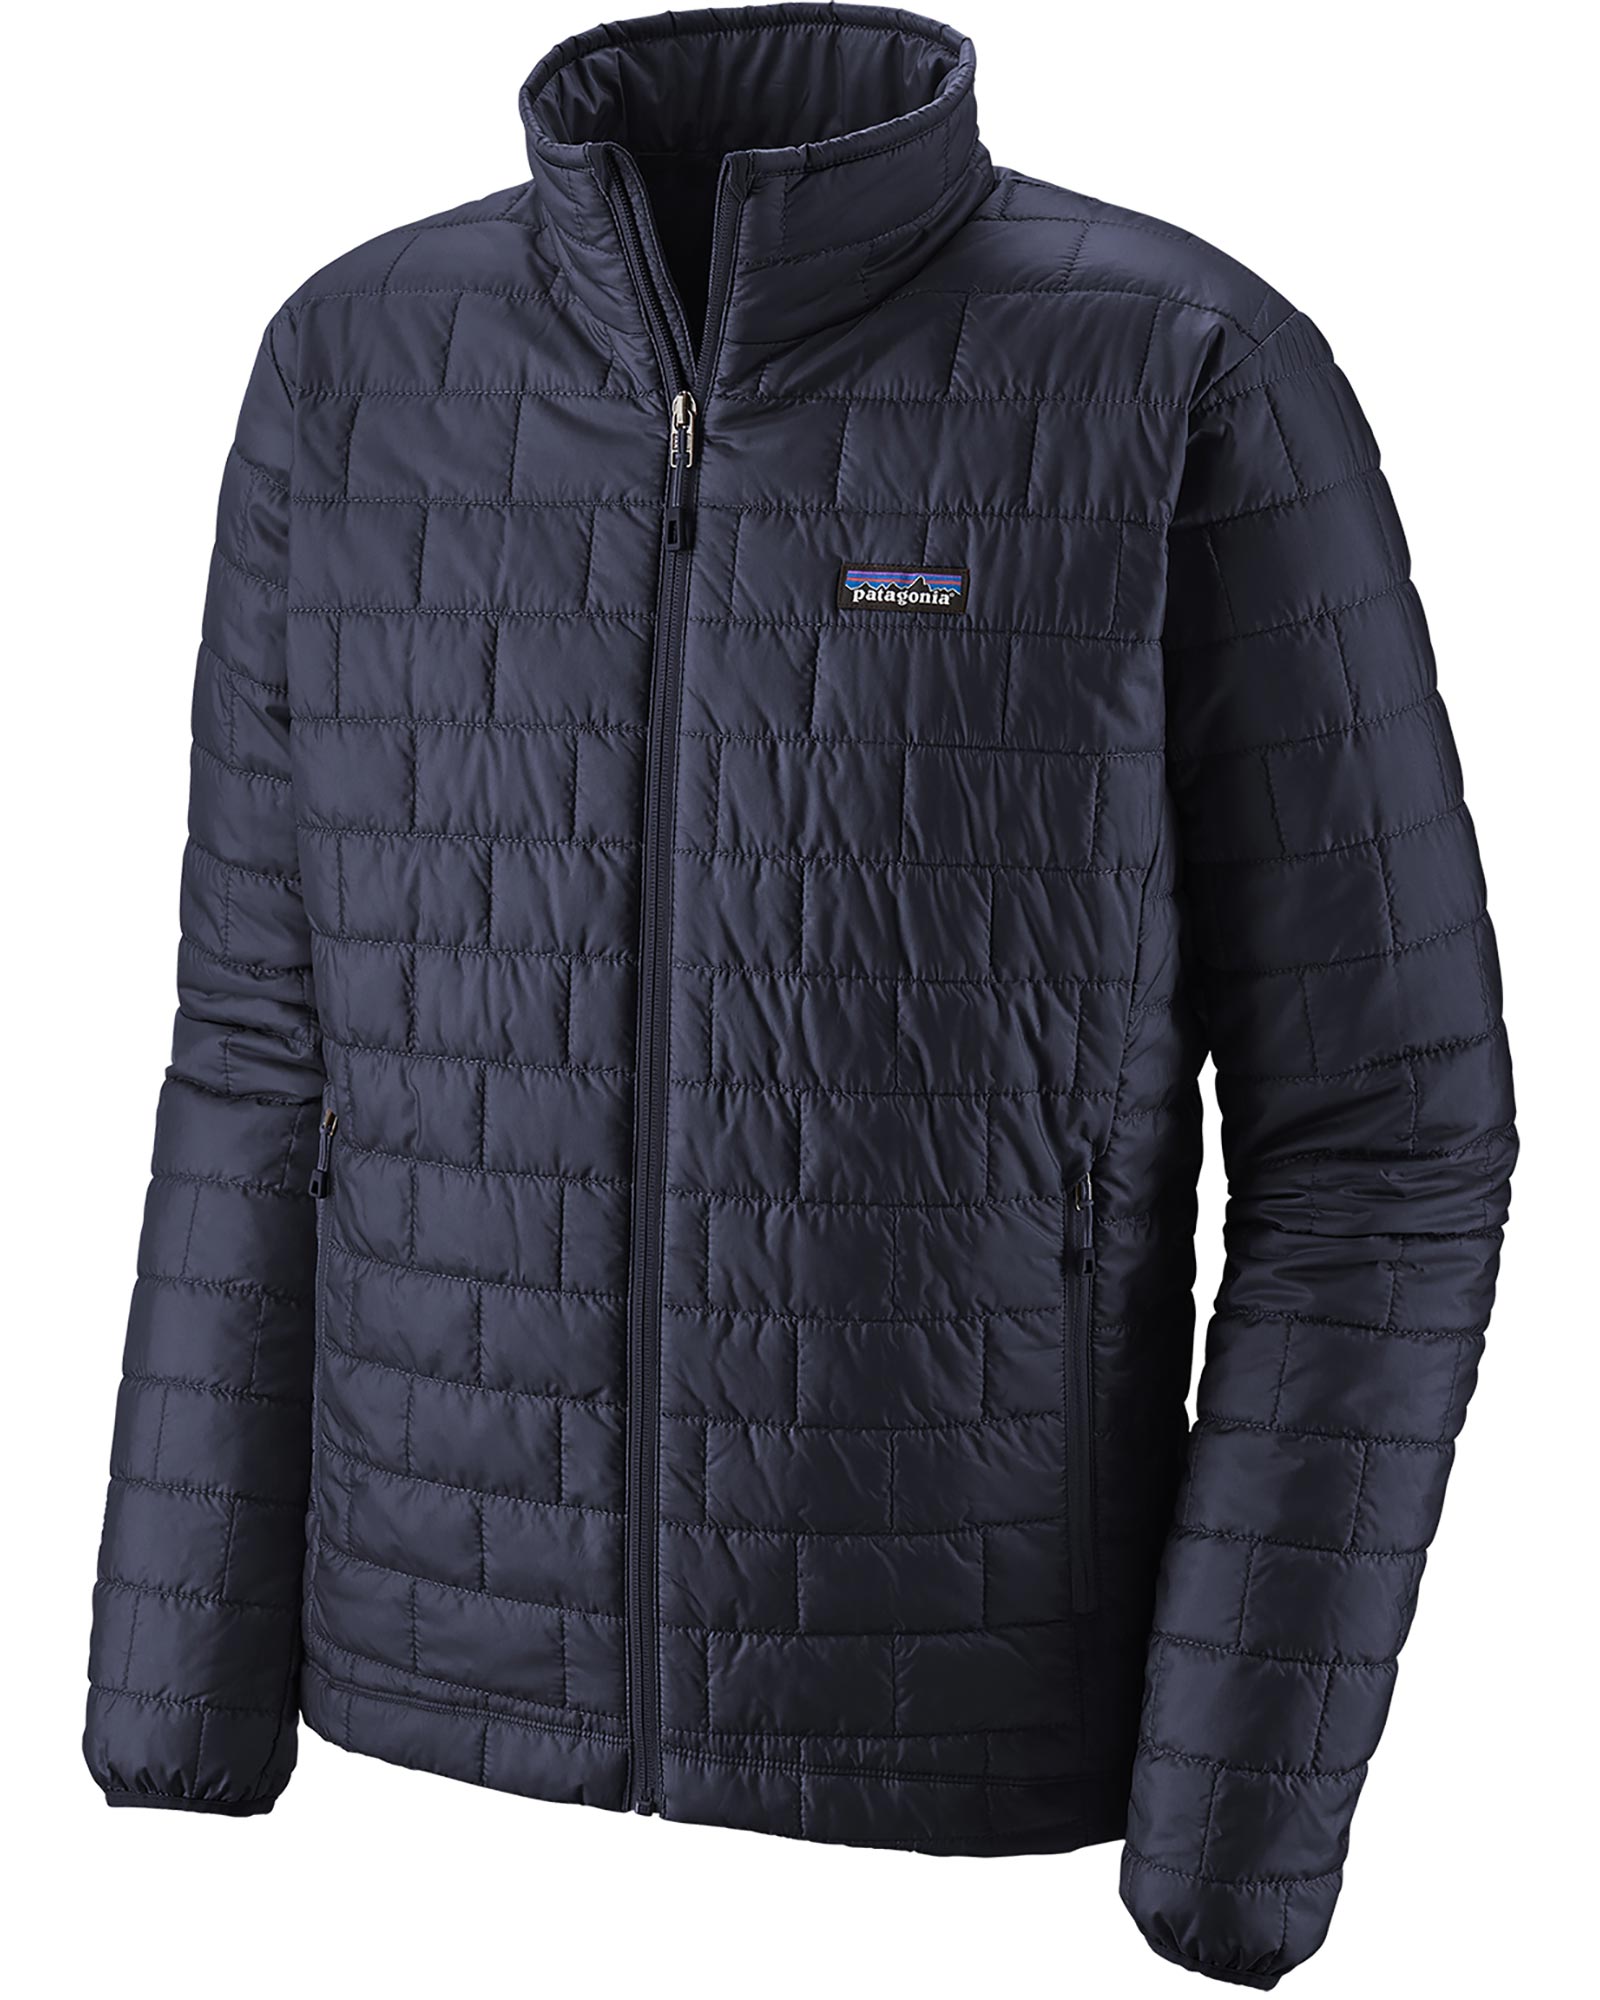 Patagonia Nano Puff Men’s Insulated Jacket - Classic Navy S